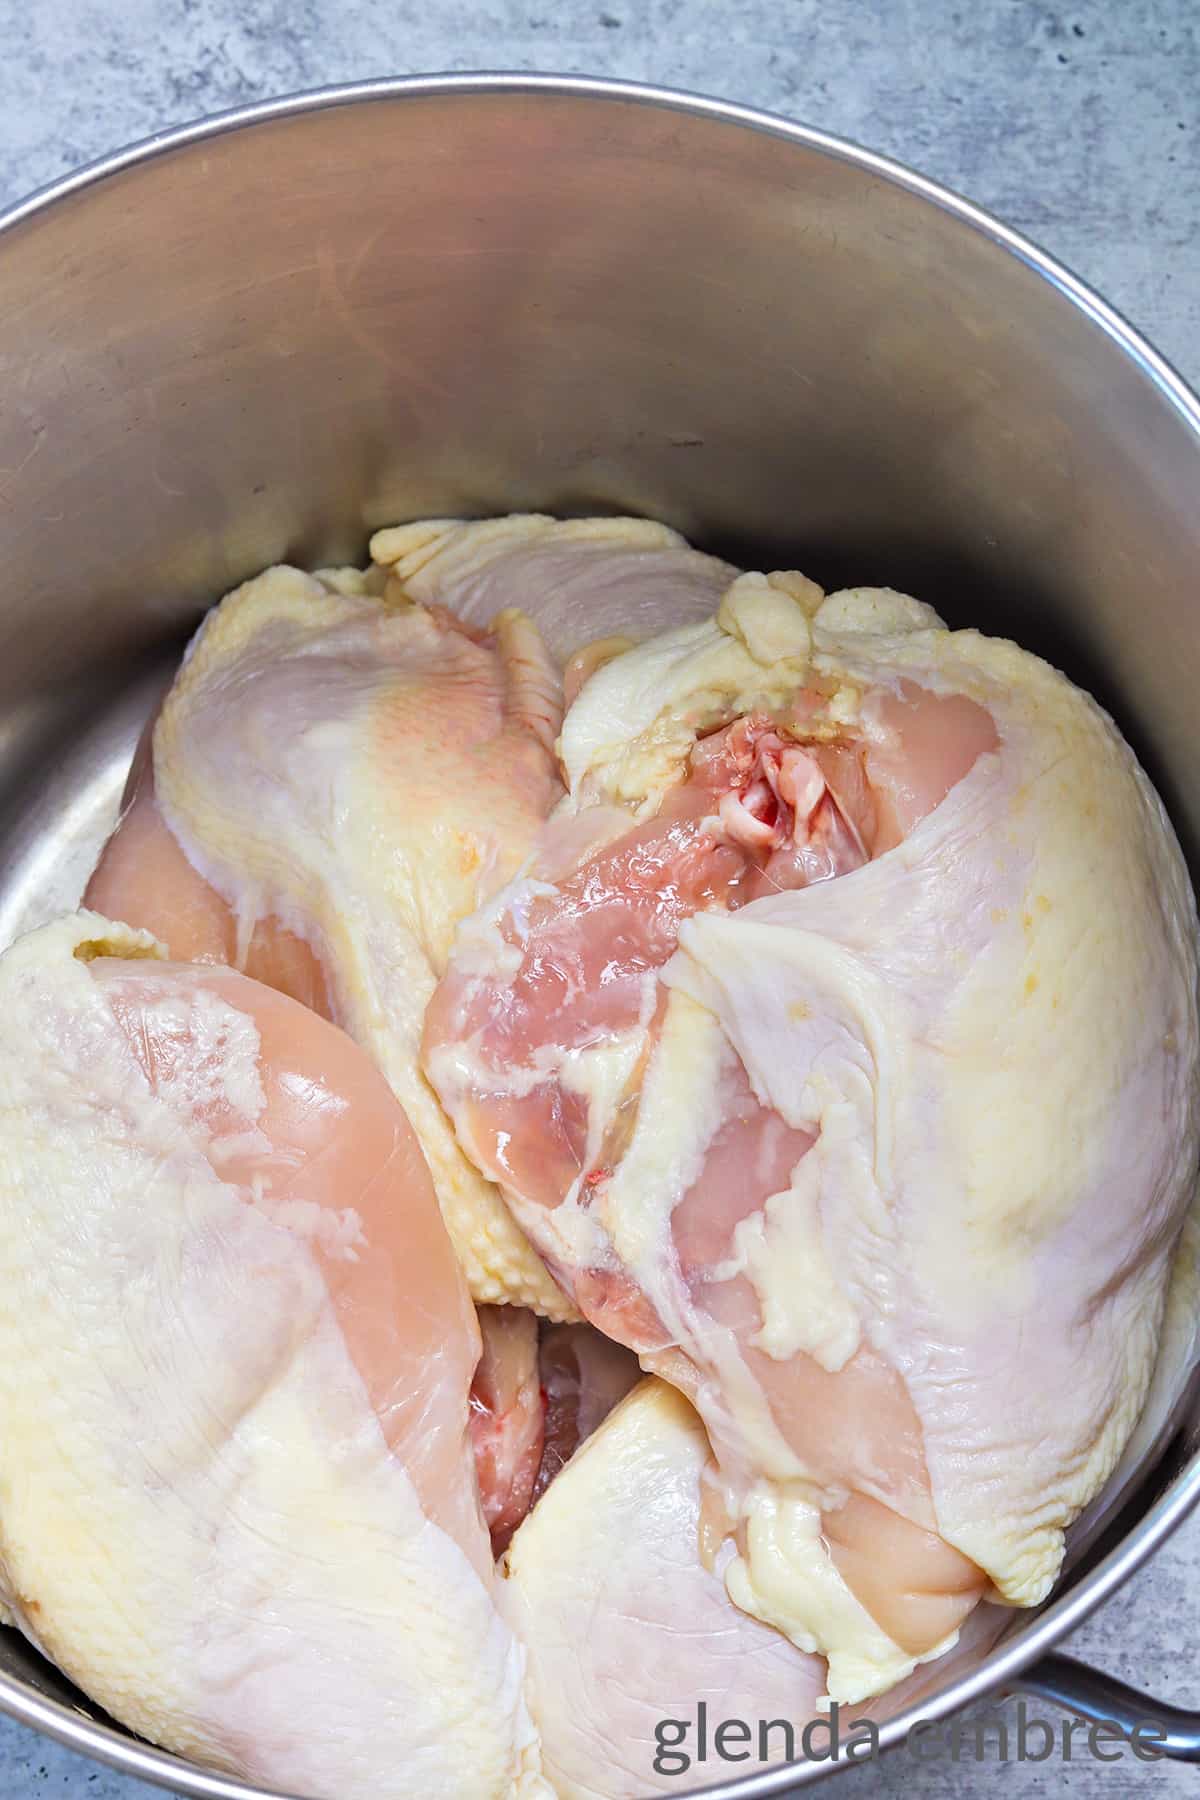 Making Chicken Stock - Chciken pieces in the bottom of a stock pot